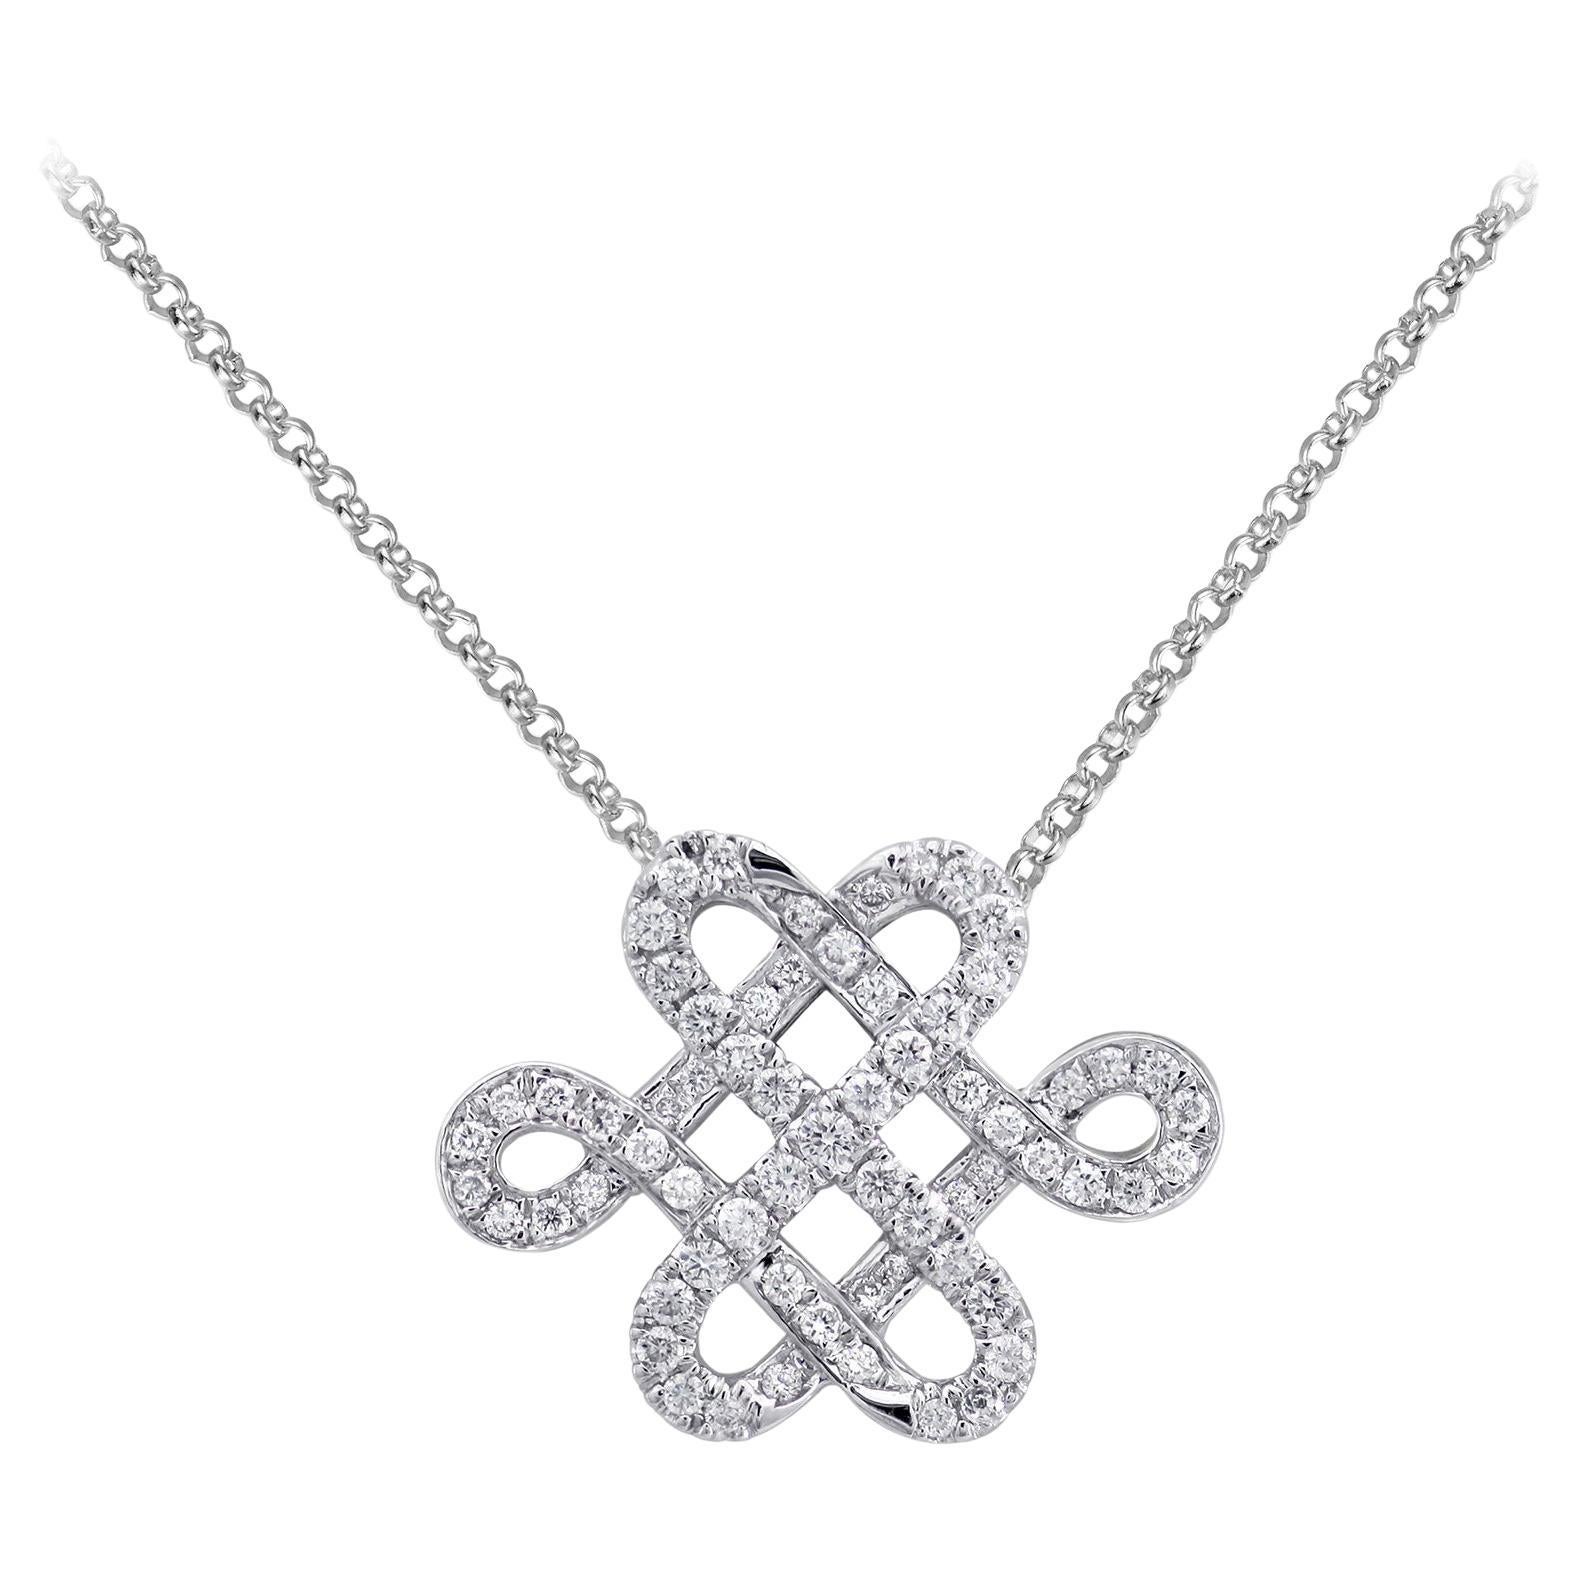 Young by Dilys' Legacy Eternal Knot Diamond Necklace in 18K White Gold